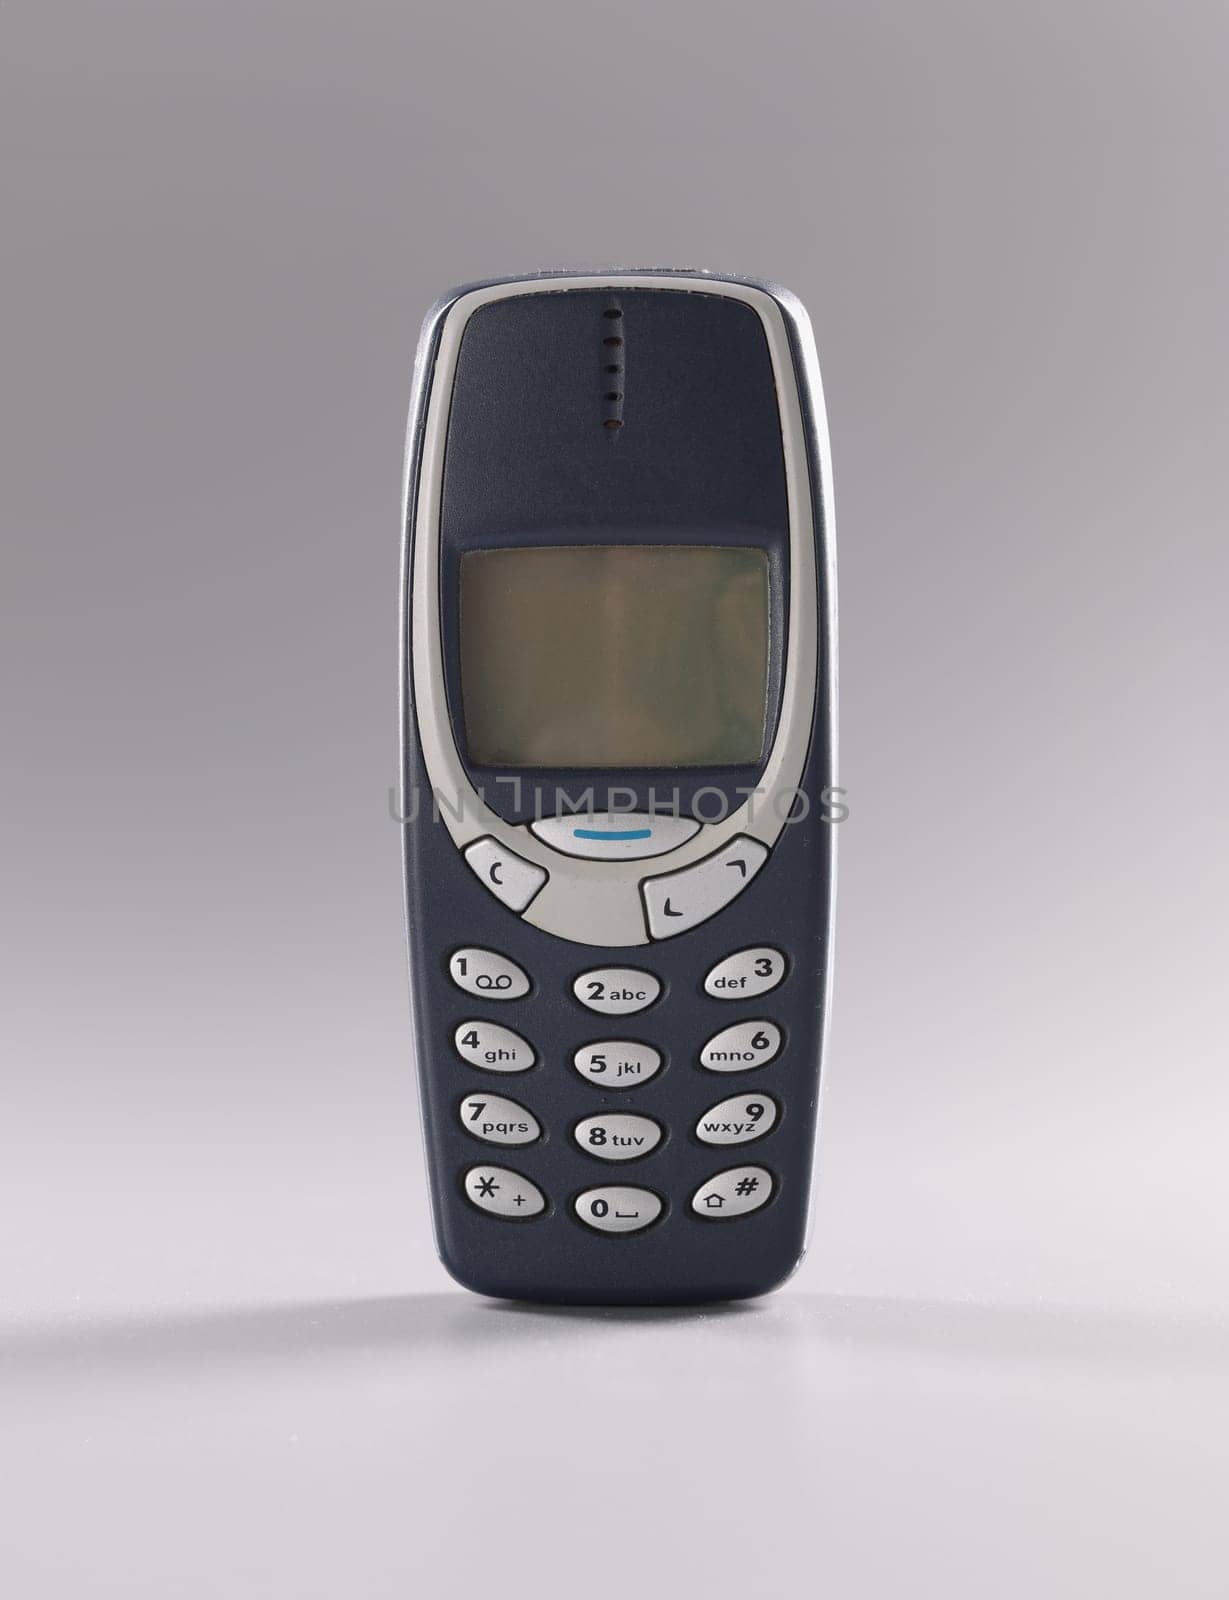 Georgia Tbilisi June 23, 2022: Original Nokia 3310 on gray background by kuprevich